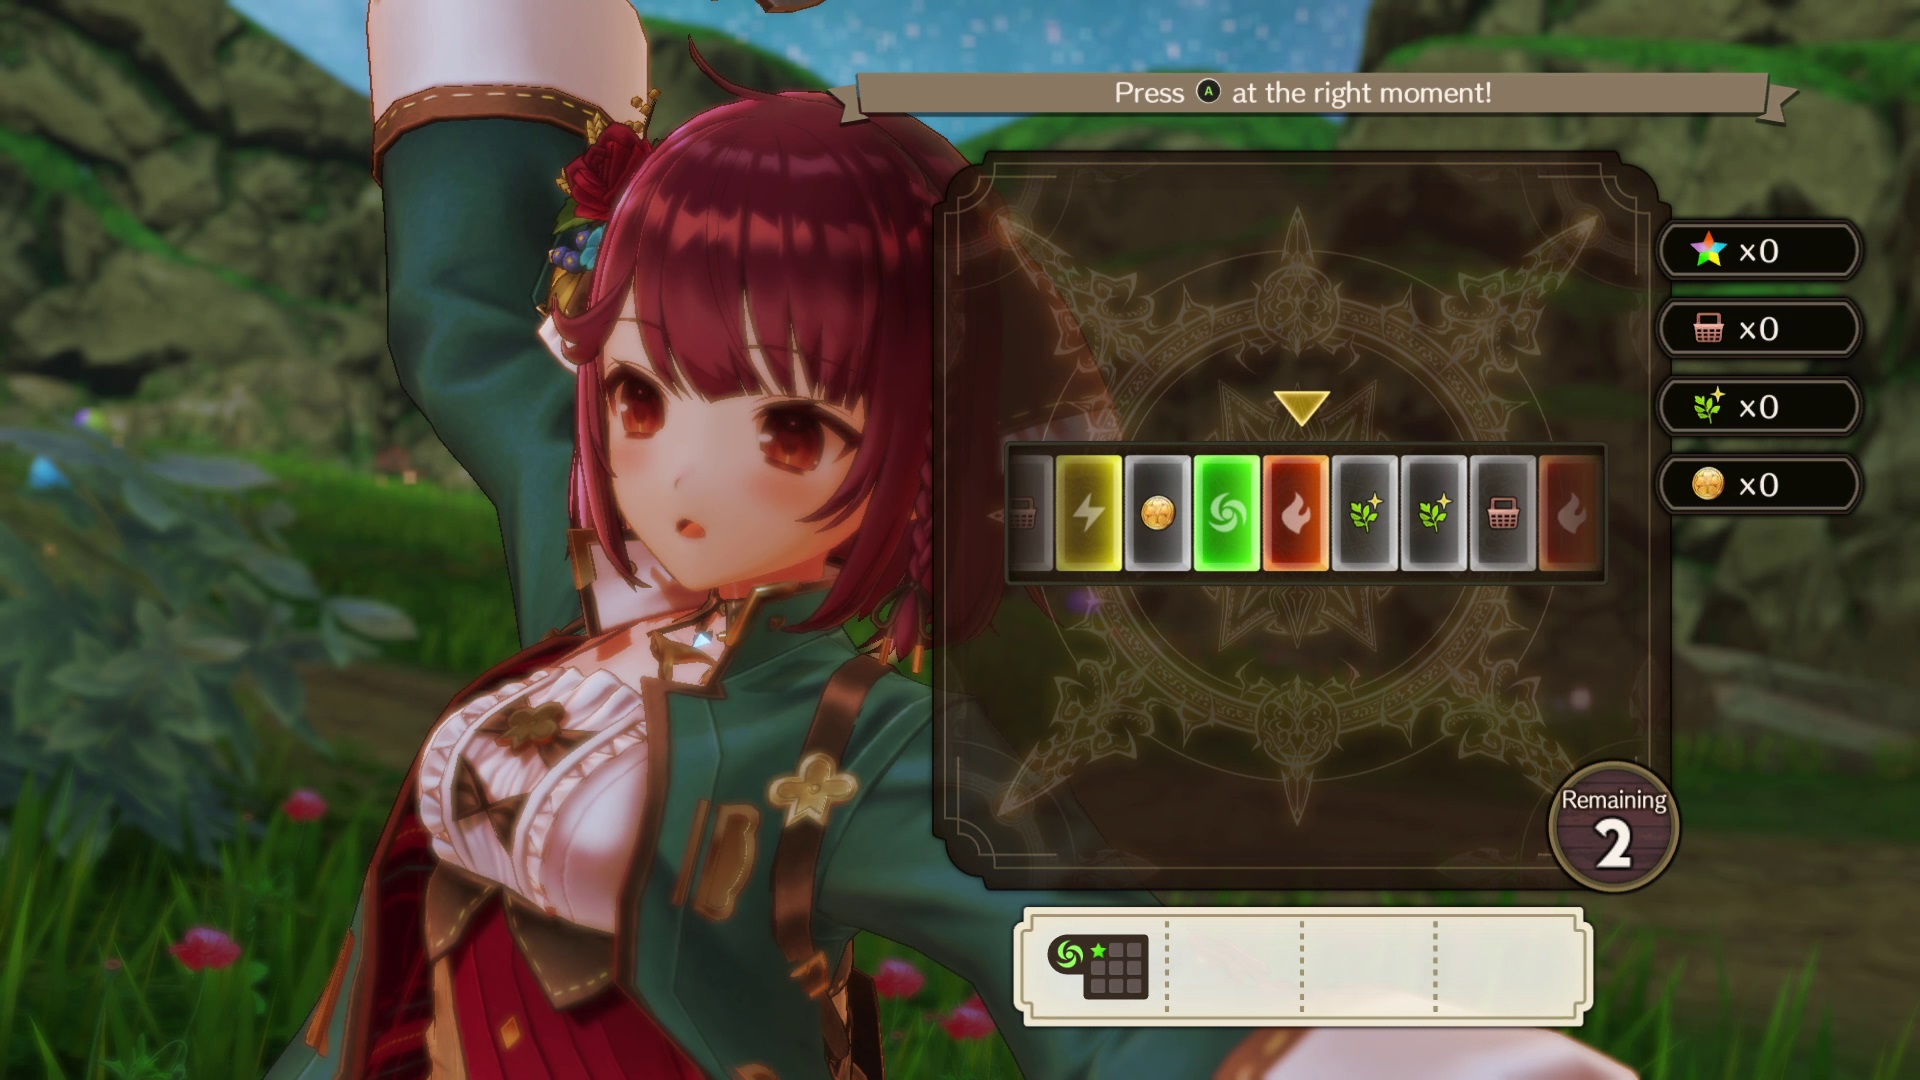 Atelier sophie 2 preview 02 8